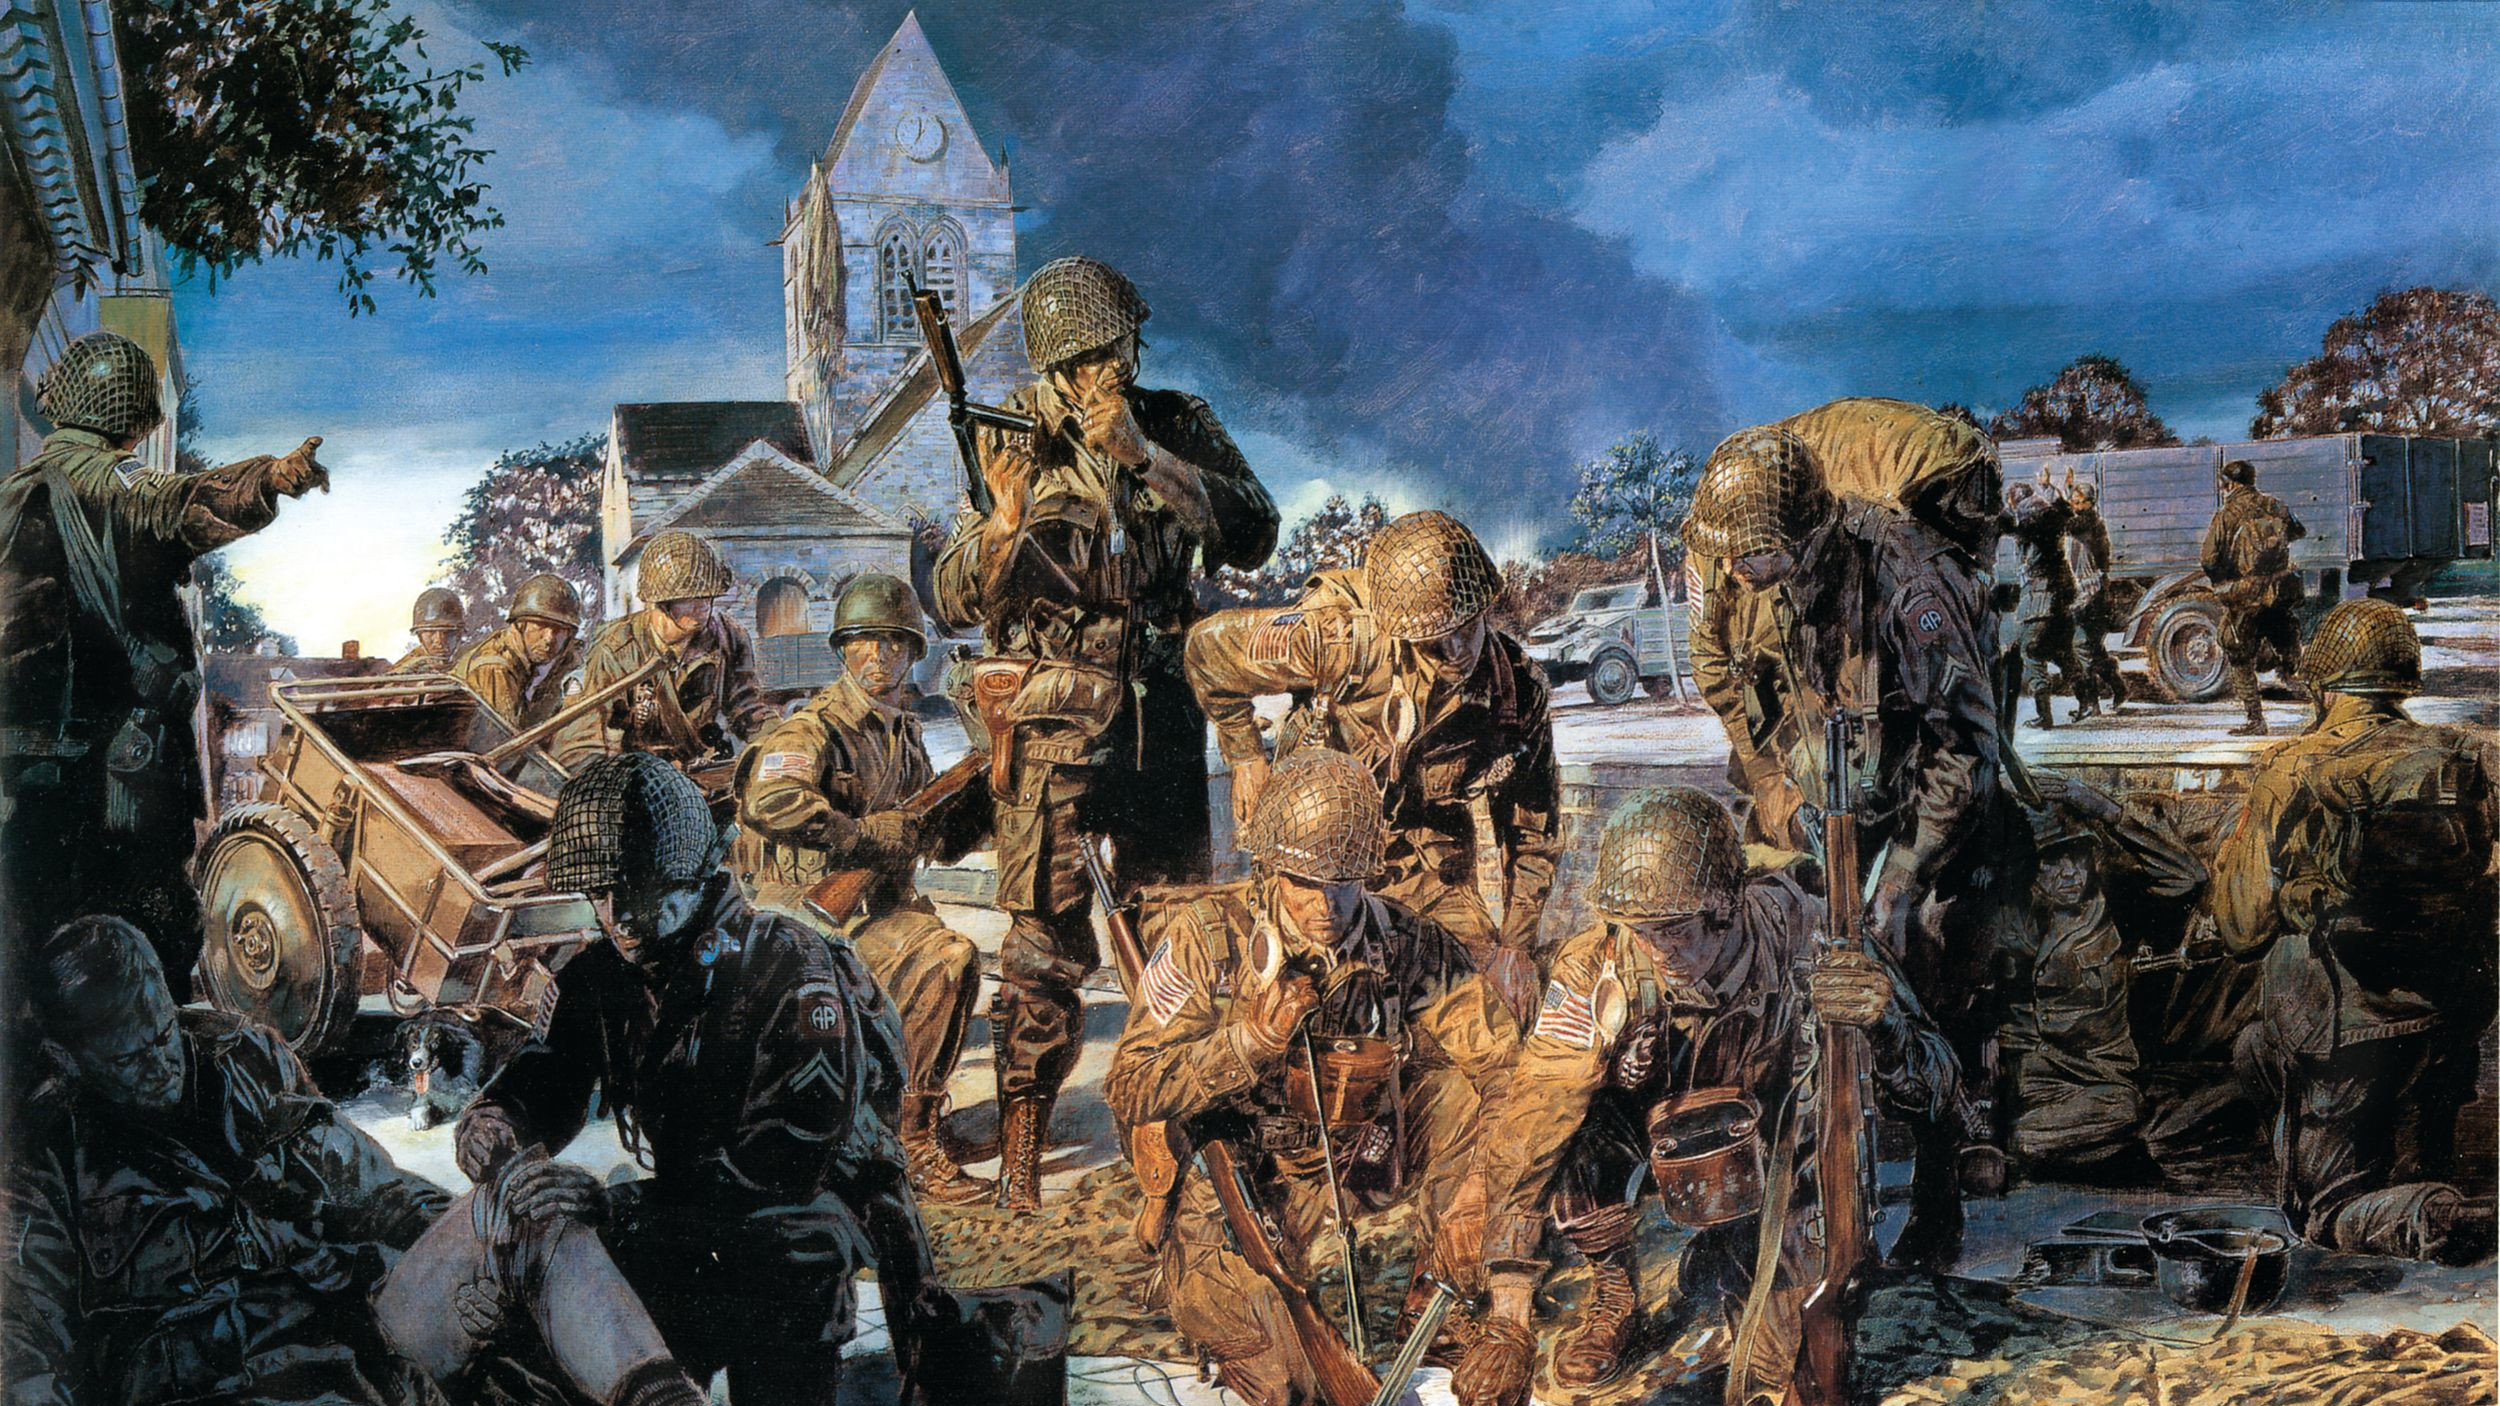 Seize the Day by Jim Dietz shows men from the 505th Regiment, 82nd Airborne in Sainte-Mère-Église, the parachute of trooper John Steele still hanging from the church tower in the background.